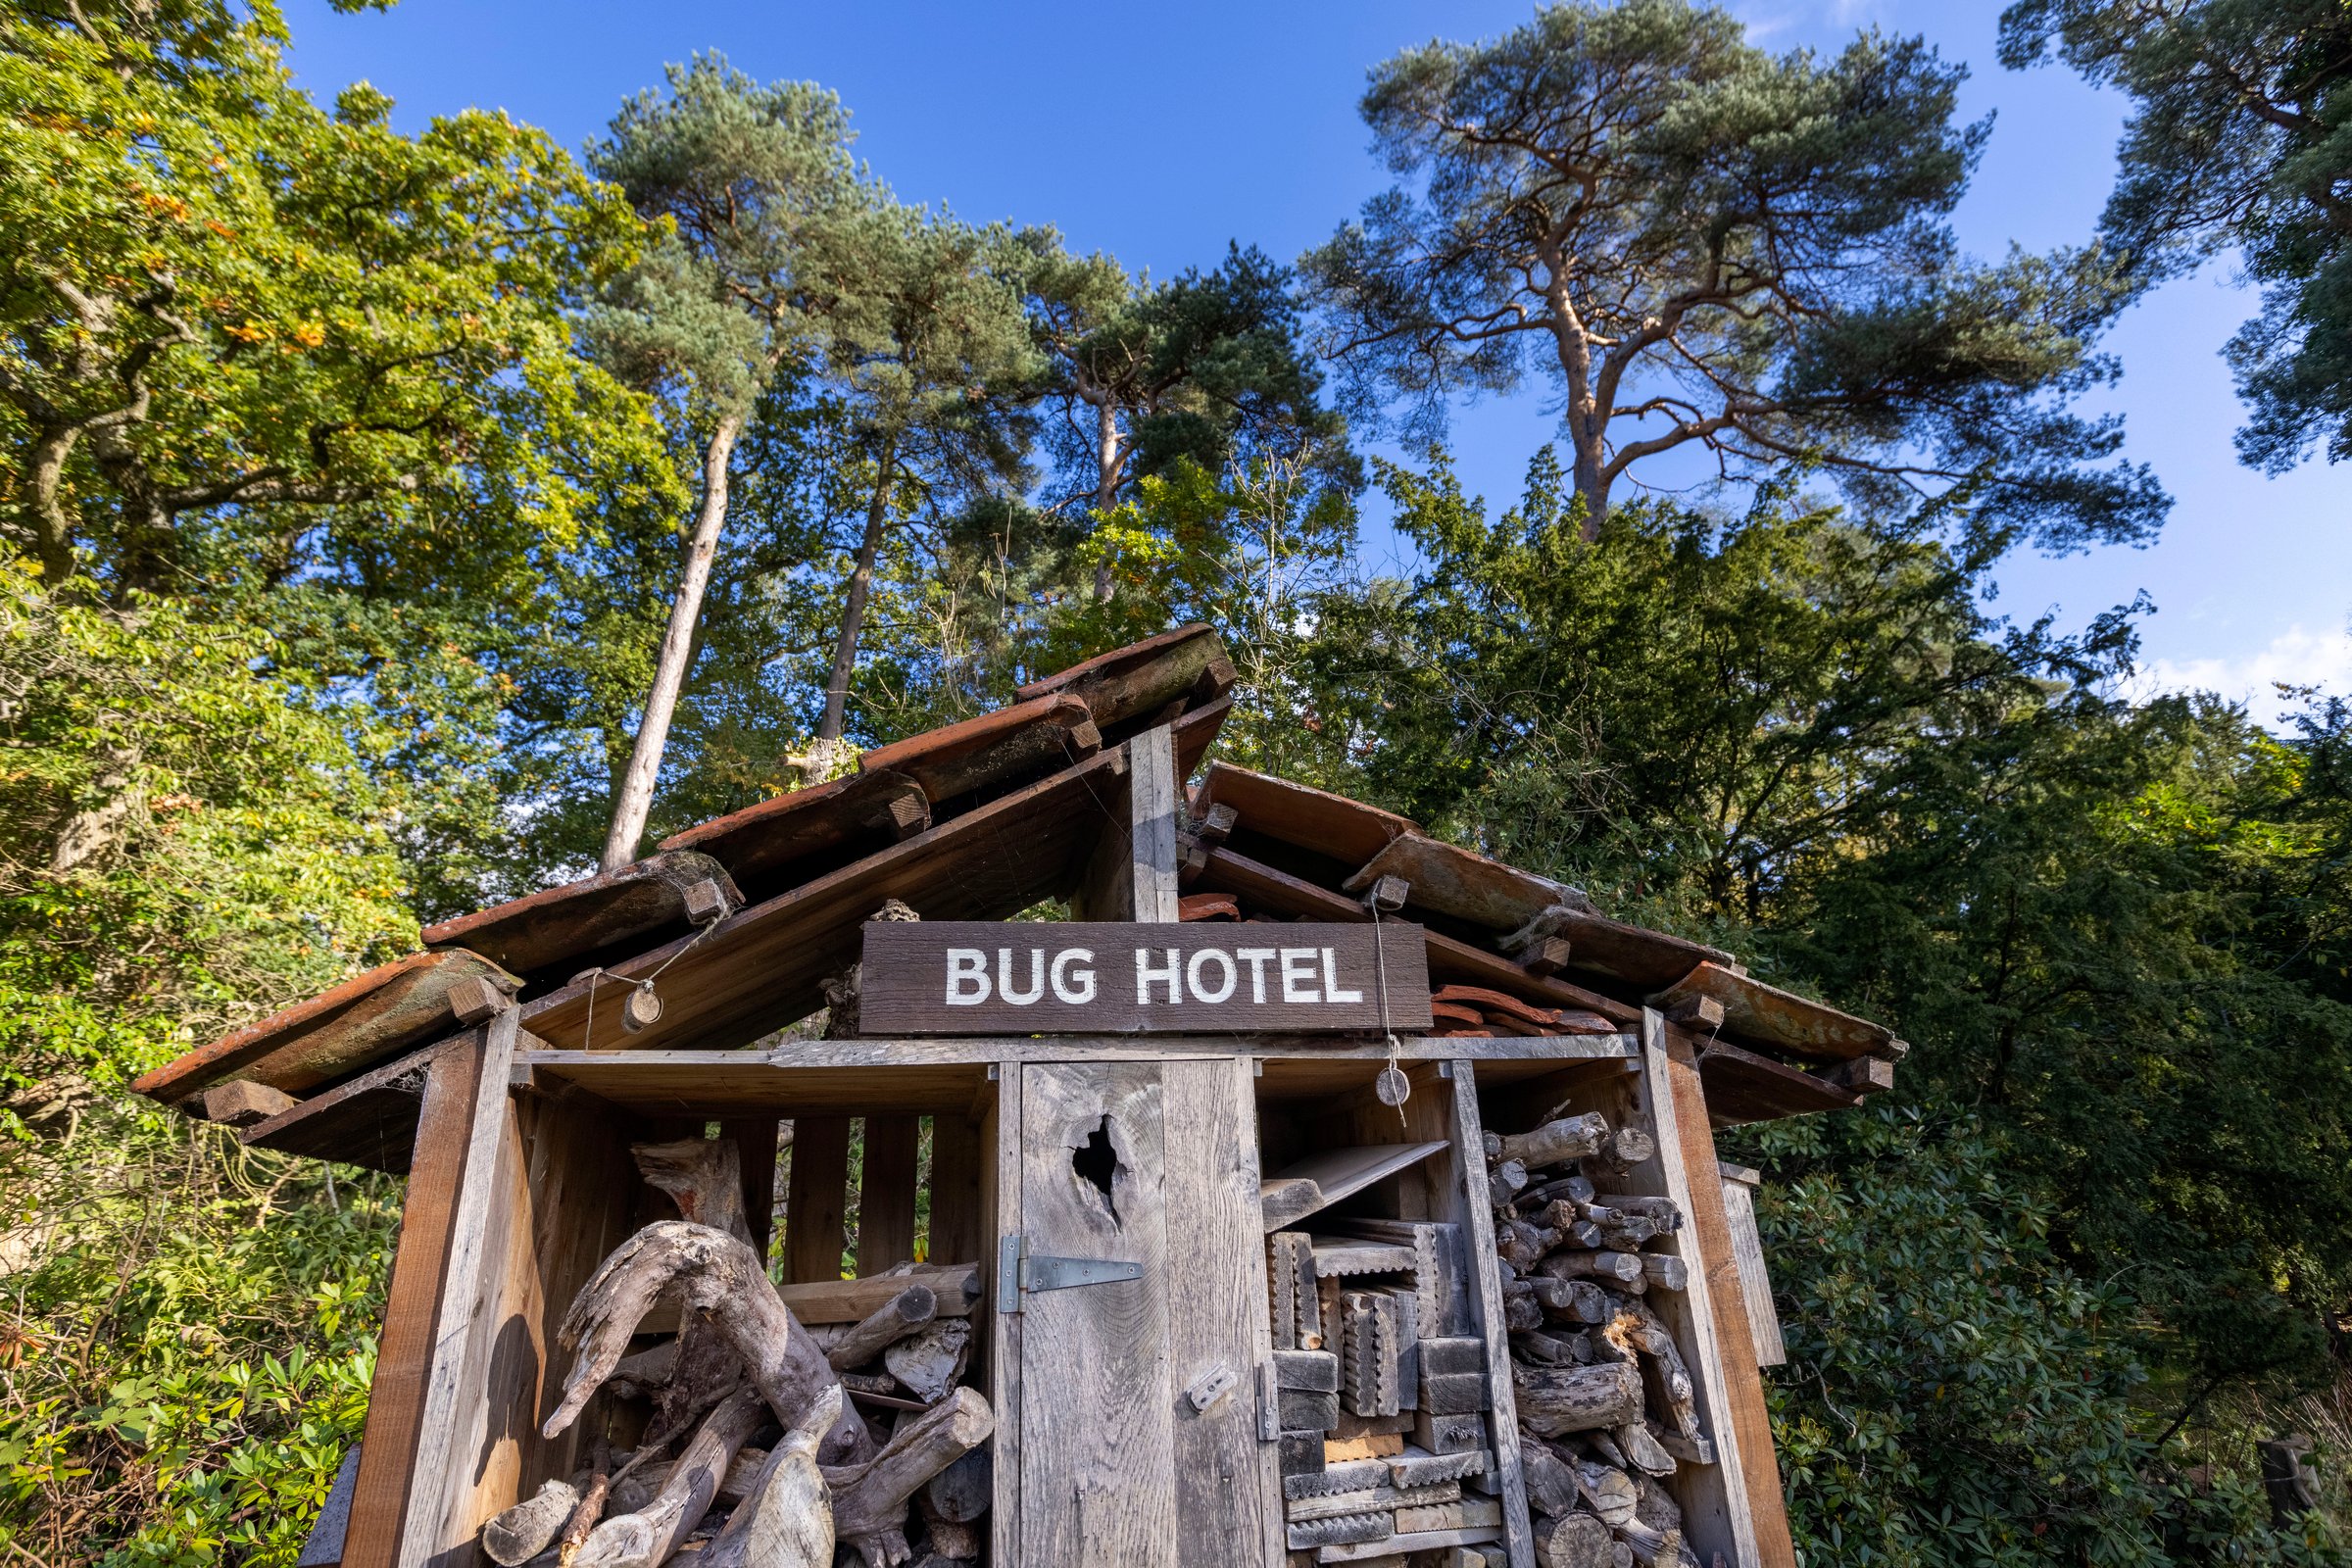 How to build a bug hotel